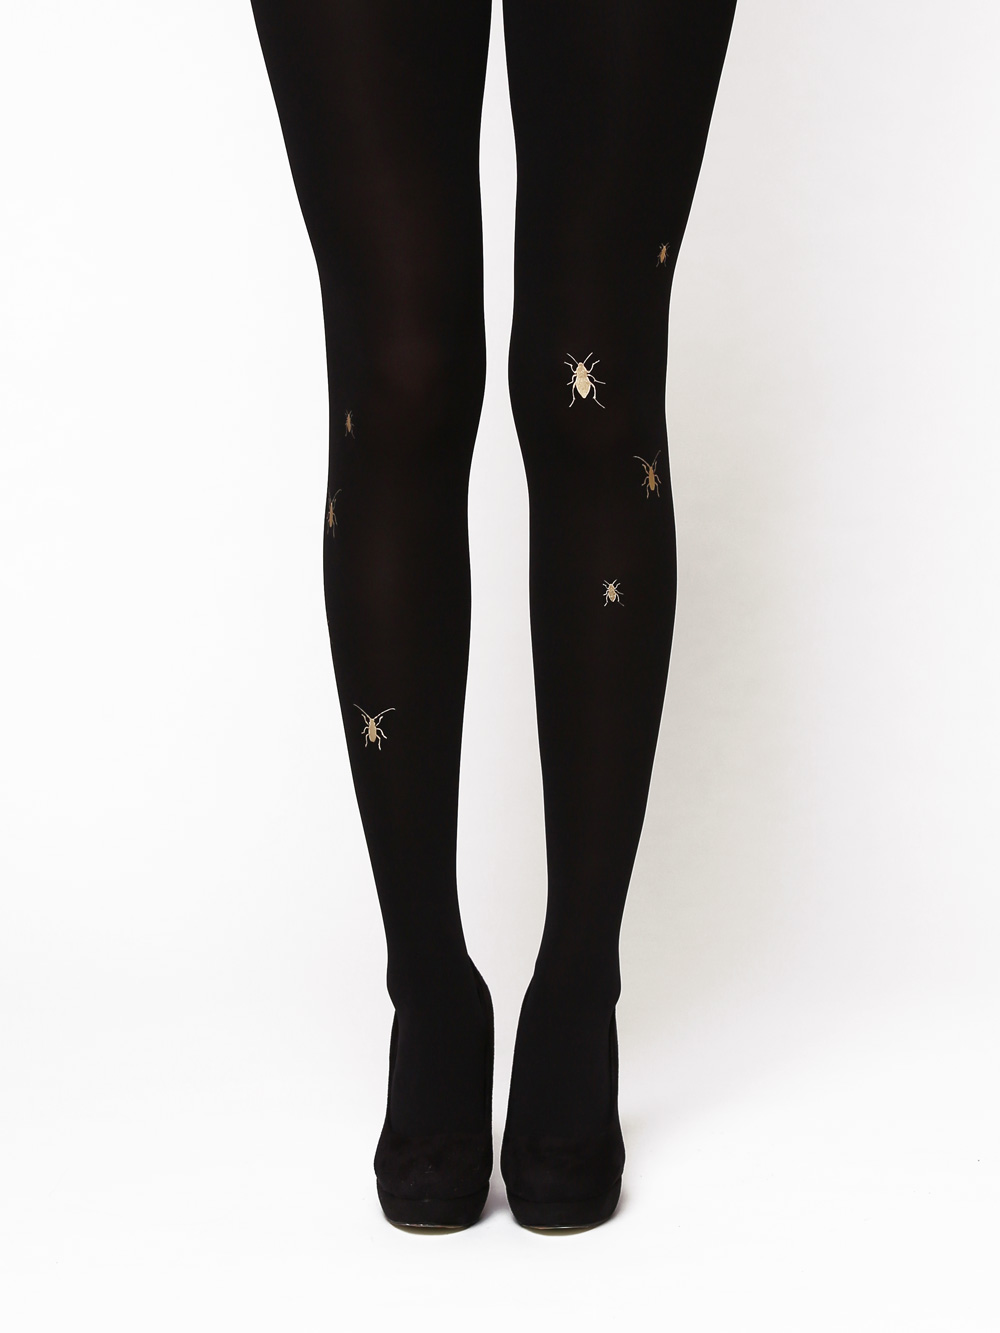 Golden beetle tights - Virivee Tights - Unique tights designed and made ...